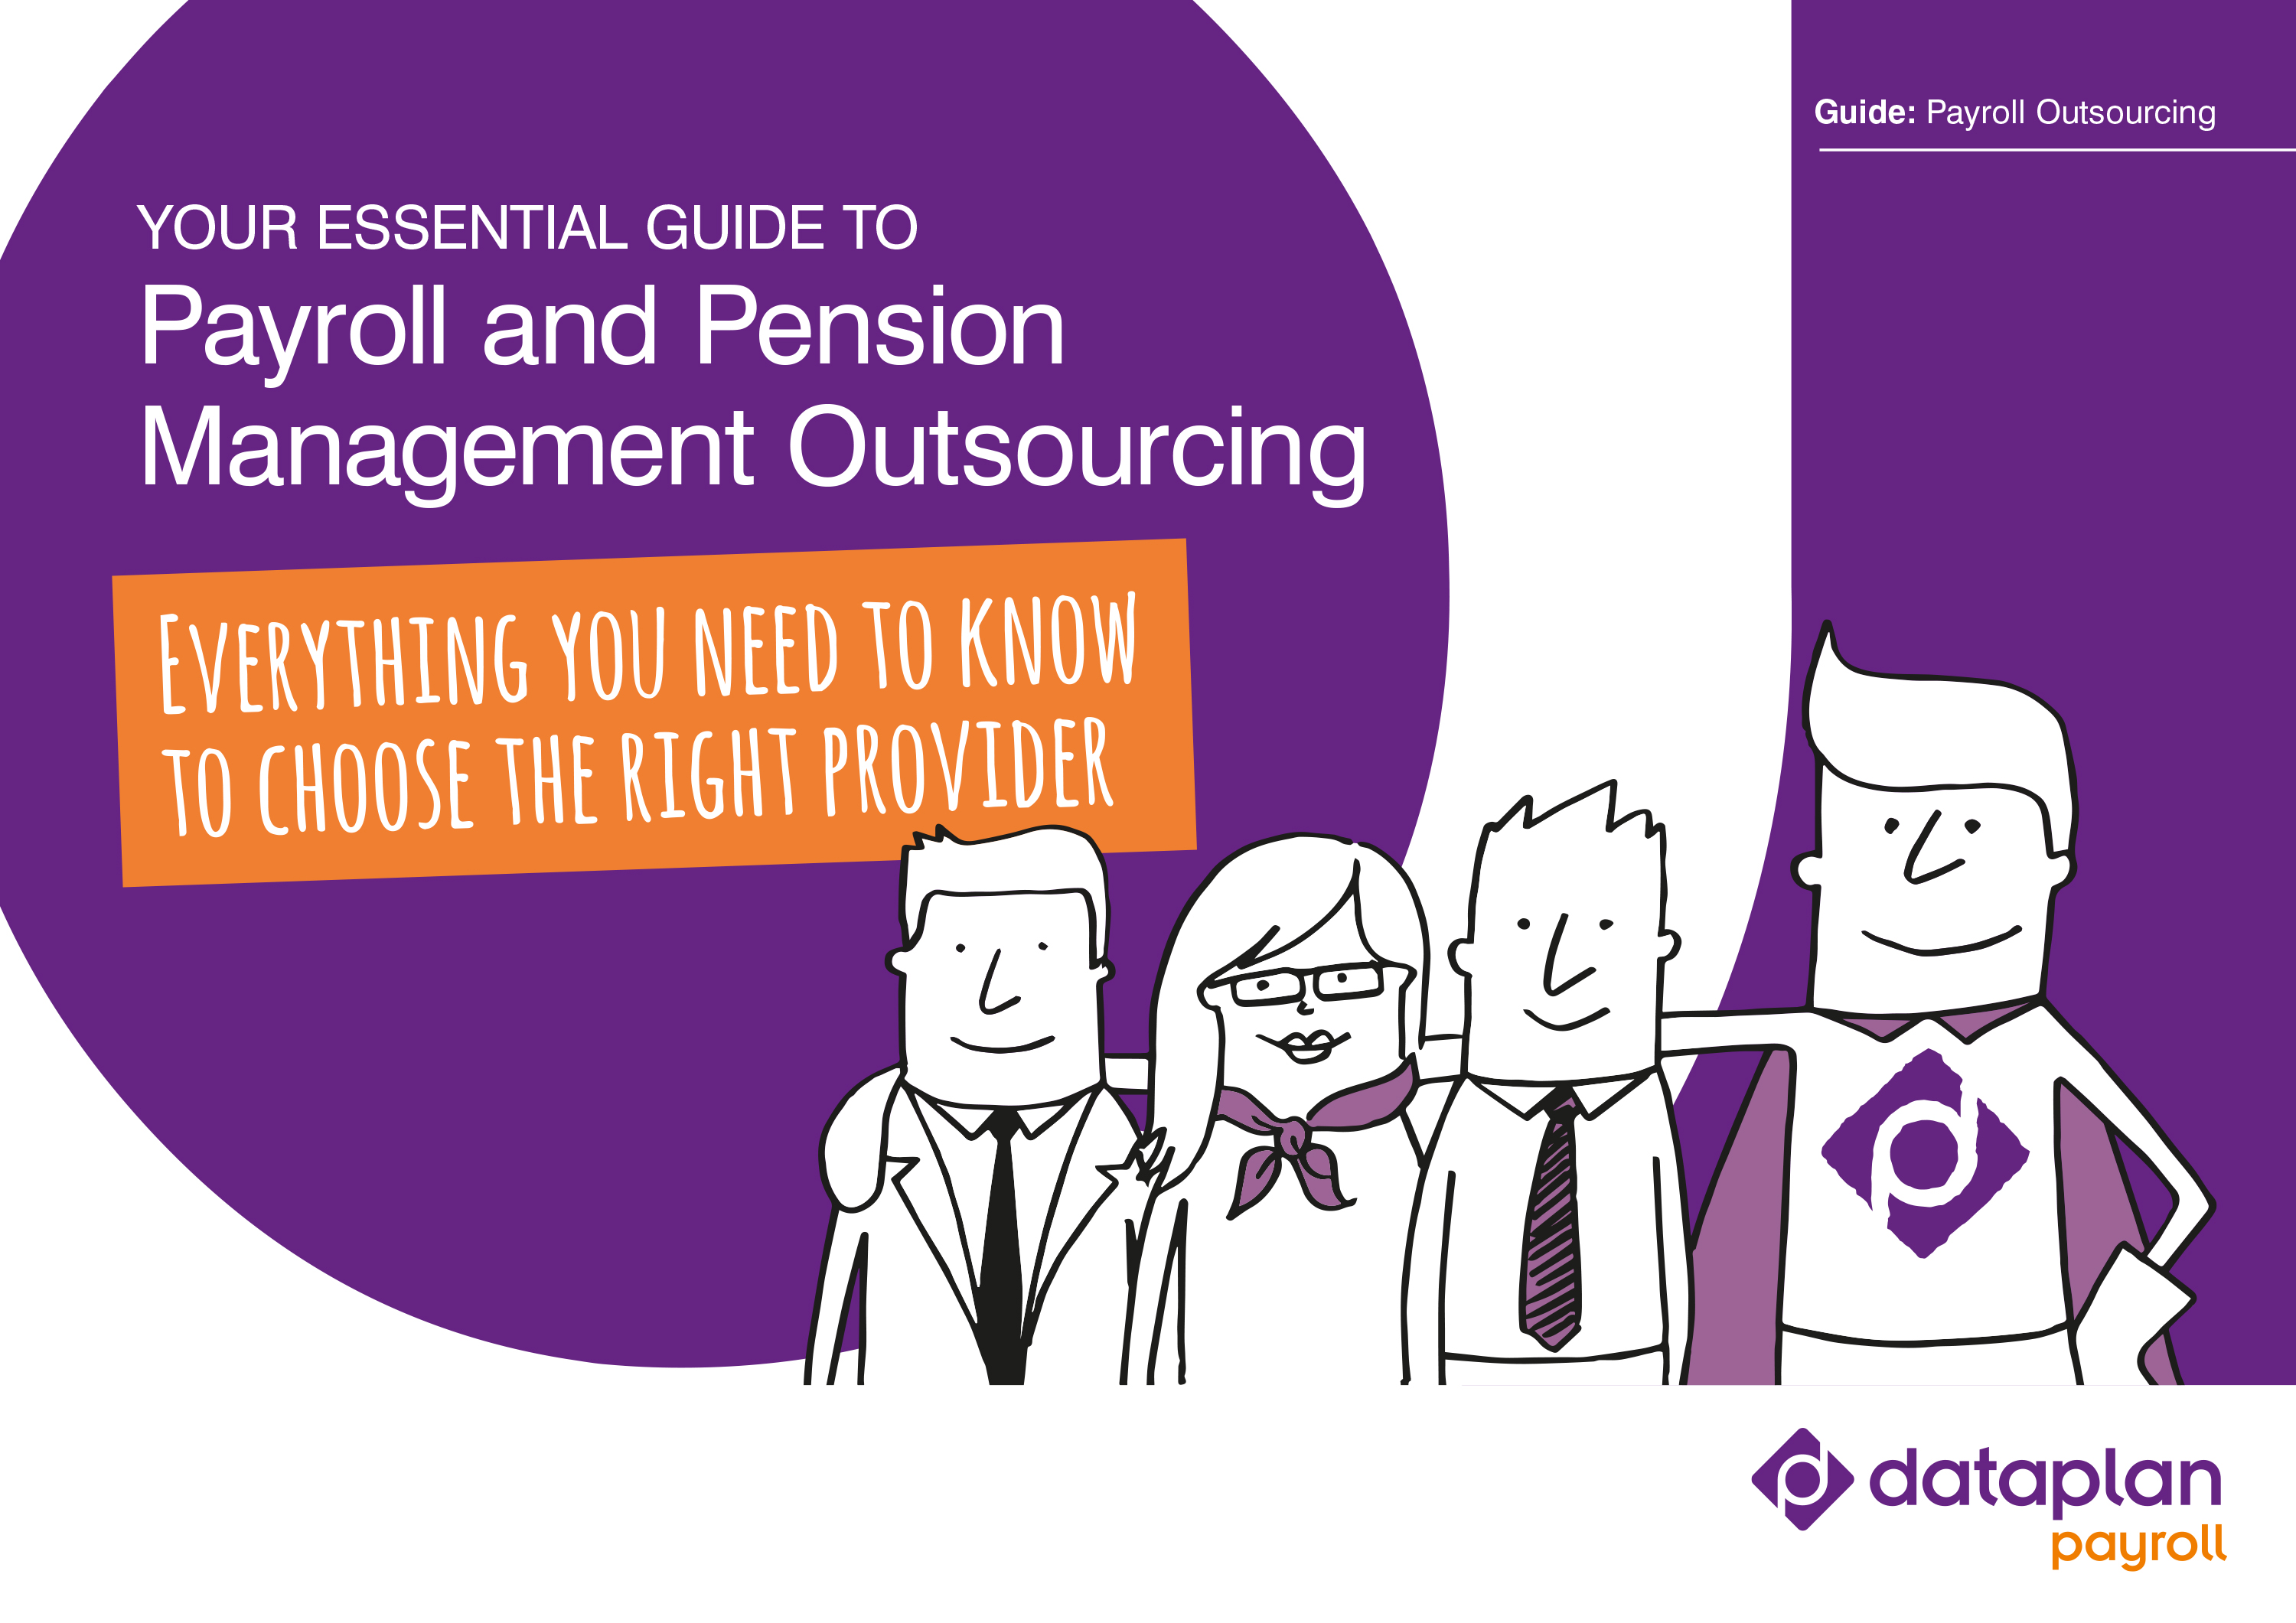 Guide to payroll and pension management outsourcing 